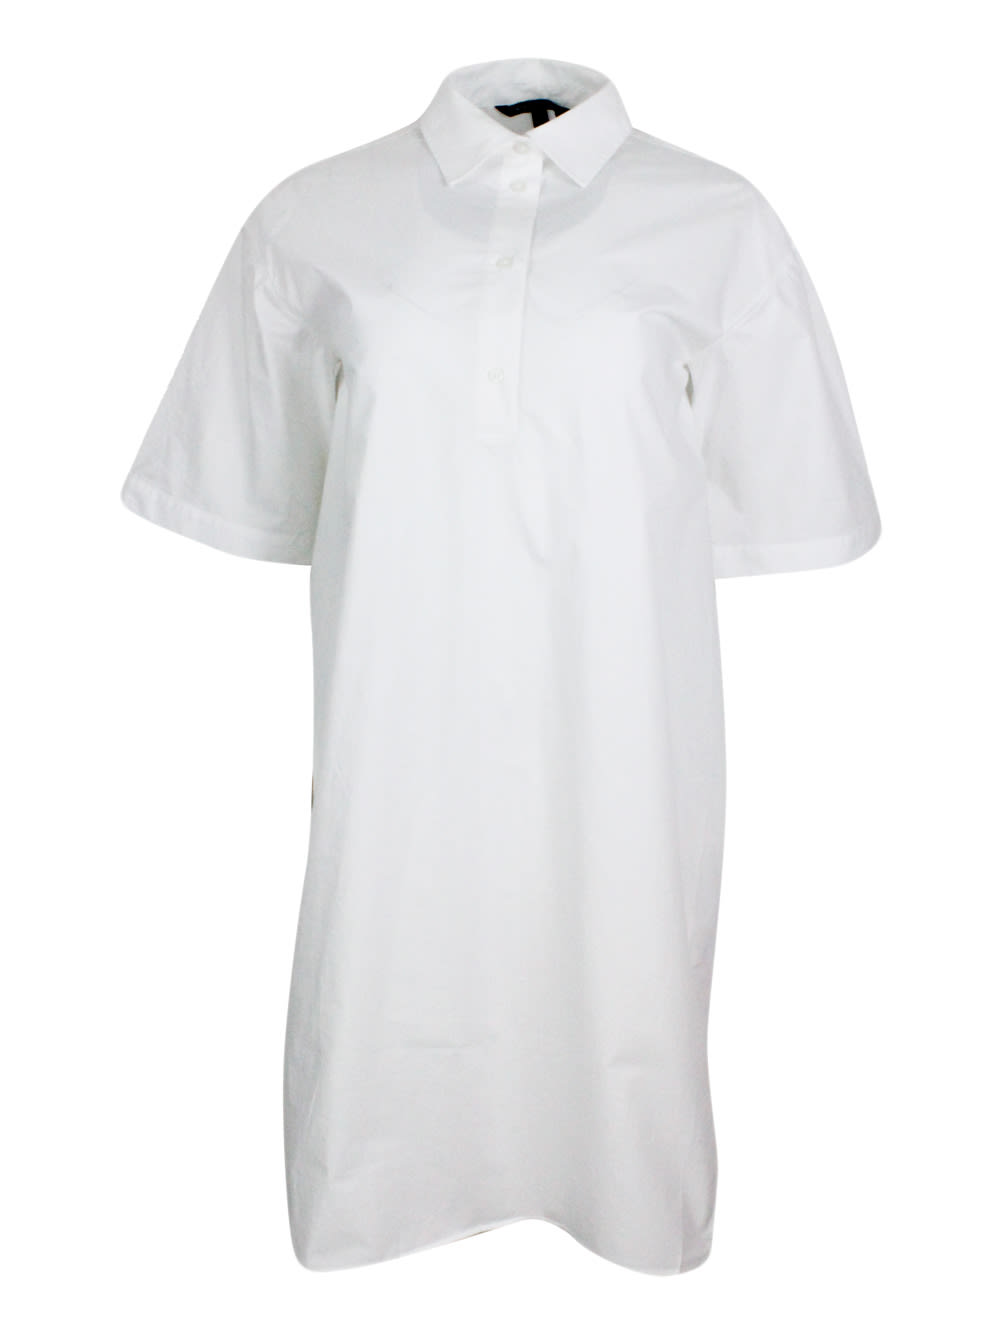 Armani Collezioni Dress Made Of Soft Cotton With Short Sleeves, With Collar And 4 Button Closure. Side Slits On The Bo In White